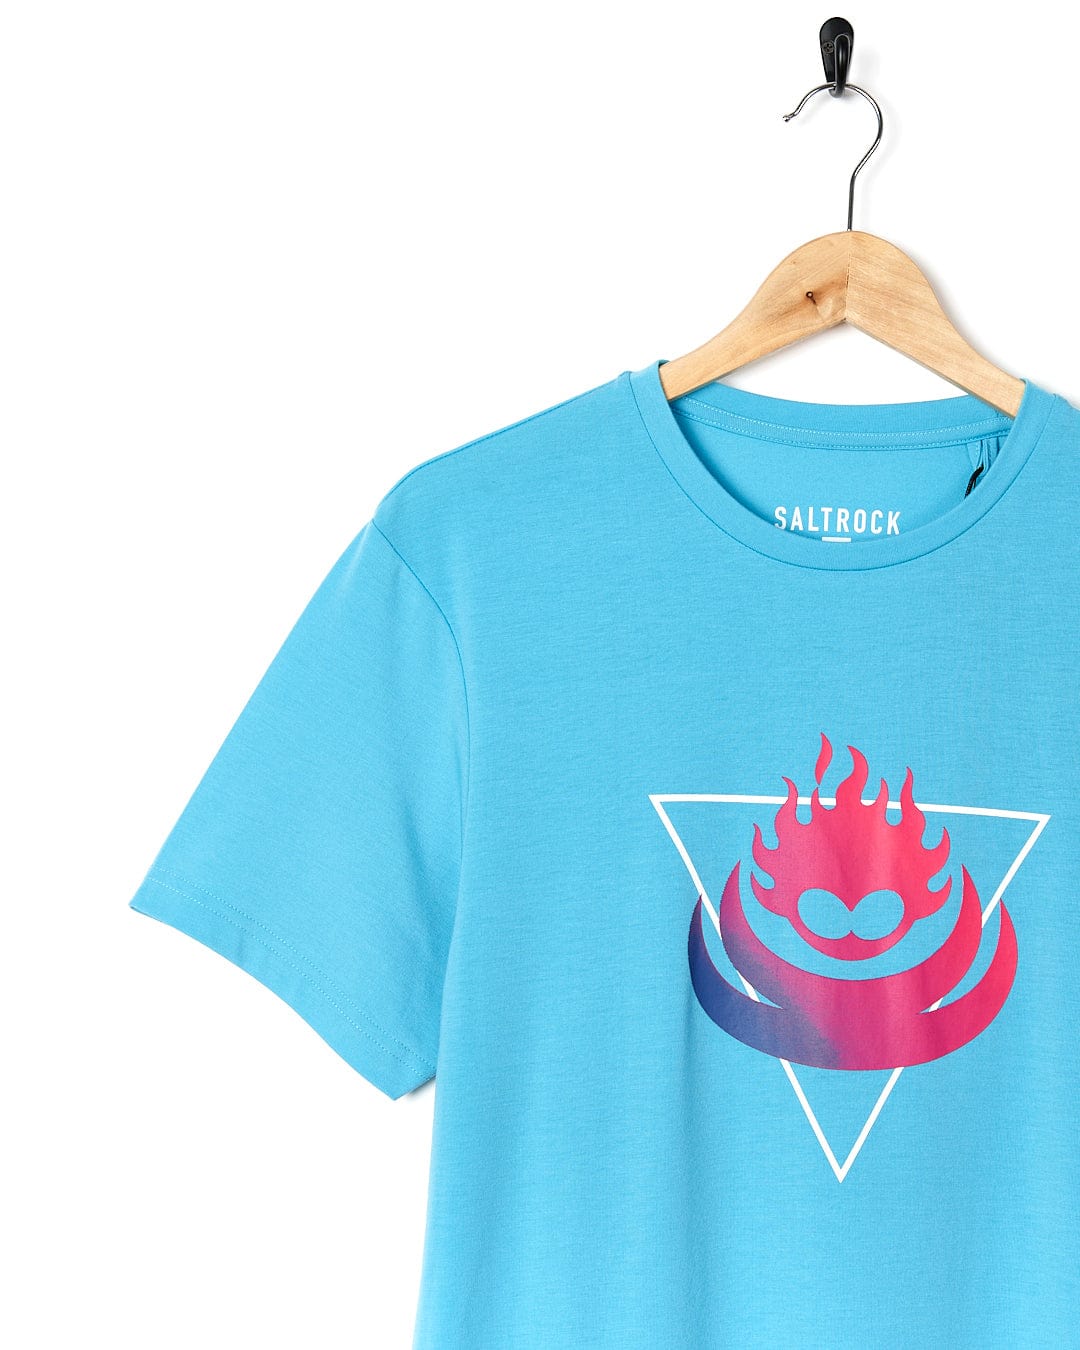 A Saltrock Flame Tri - Mens Recycled Short Sleeve T-Shirt - Teal with a pink and blue heart on it.